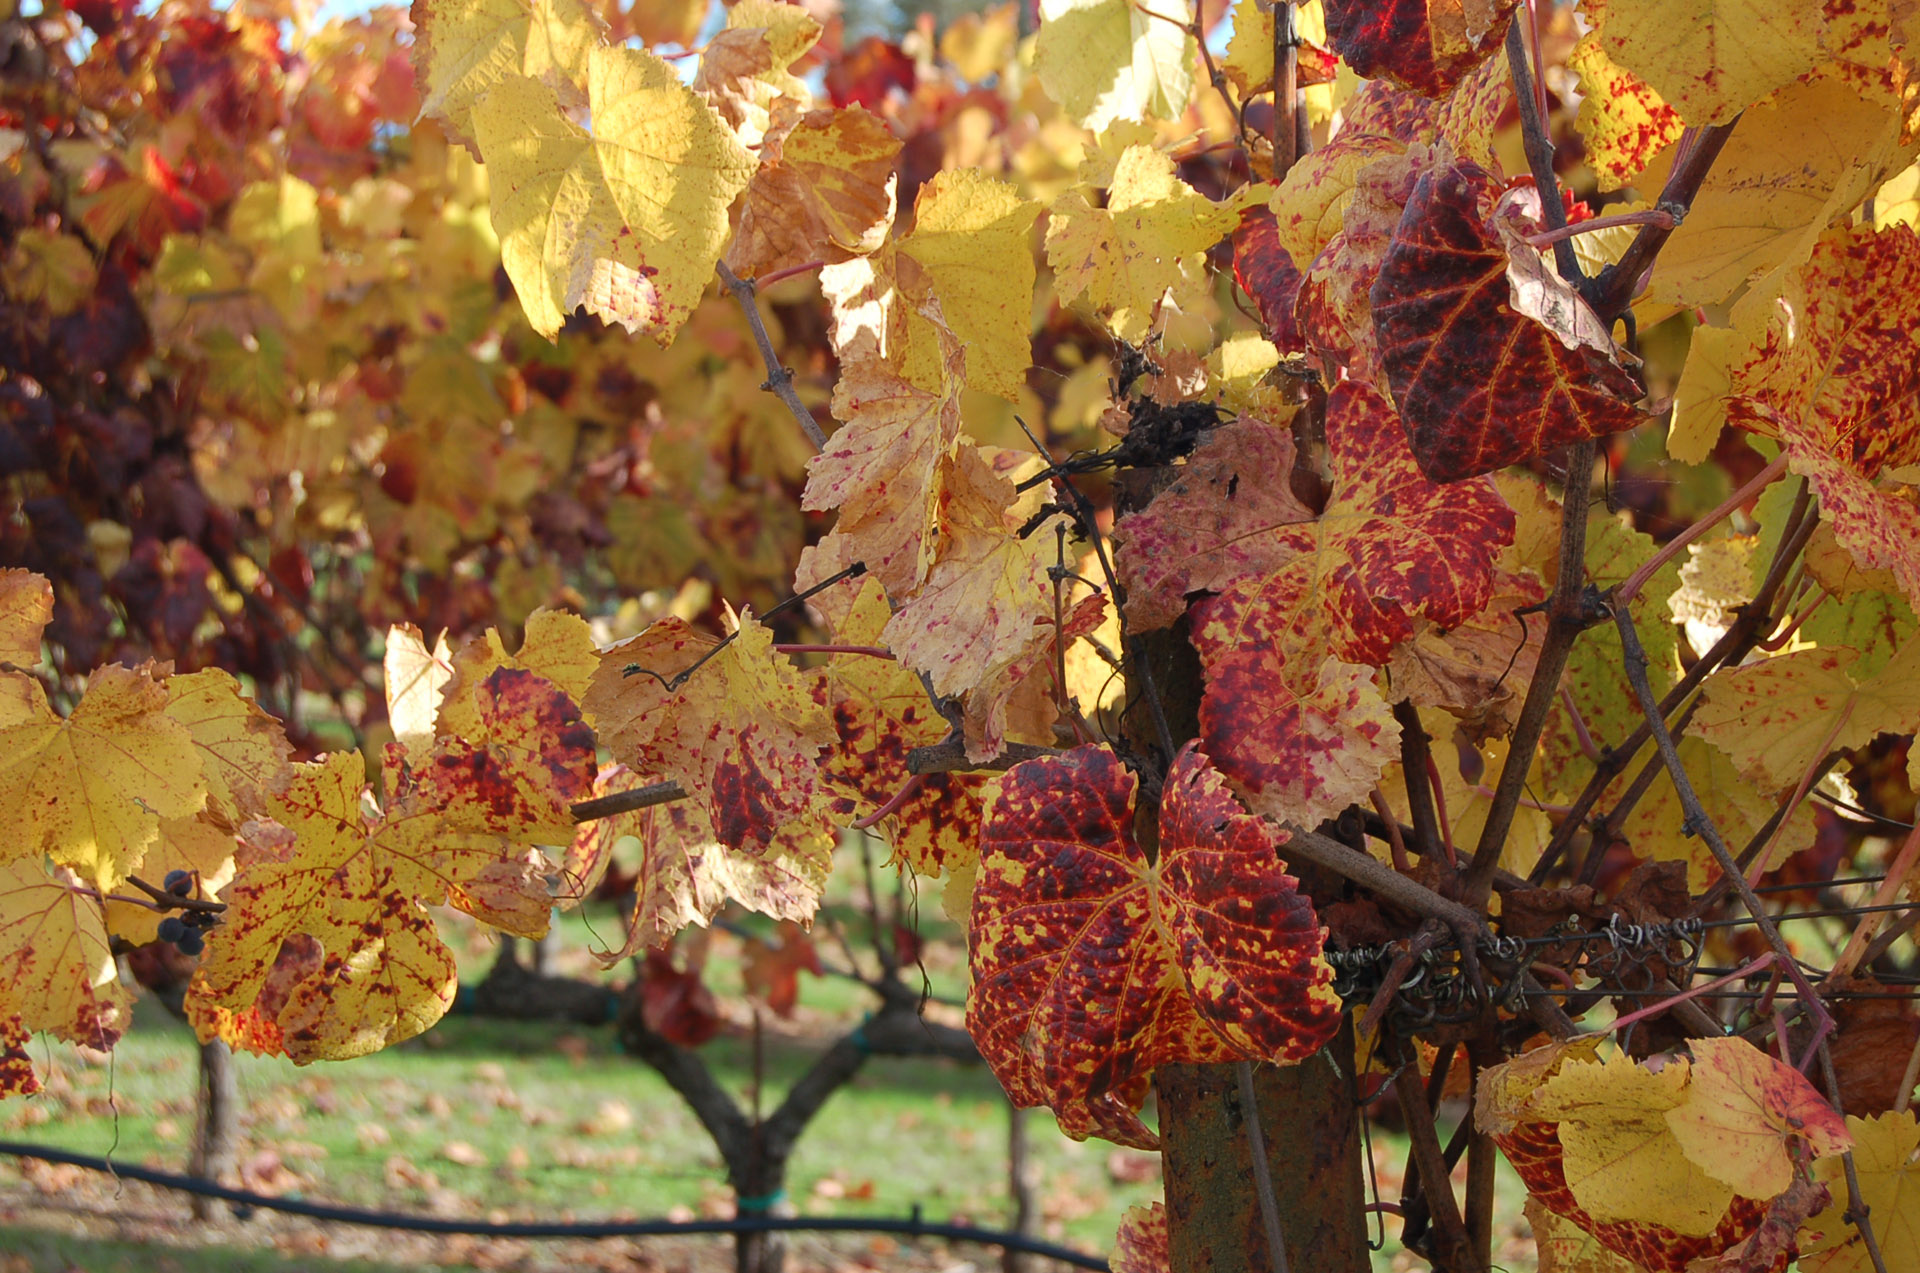 Fall is a beautiful time to go to wine country and after the recent devastating fires, merchants in Napa, Sonoma and Mendocino counties could use the financial support of visitors.